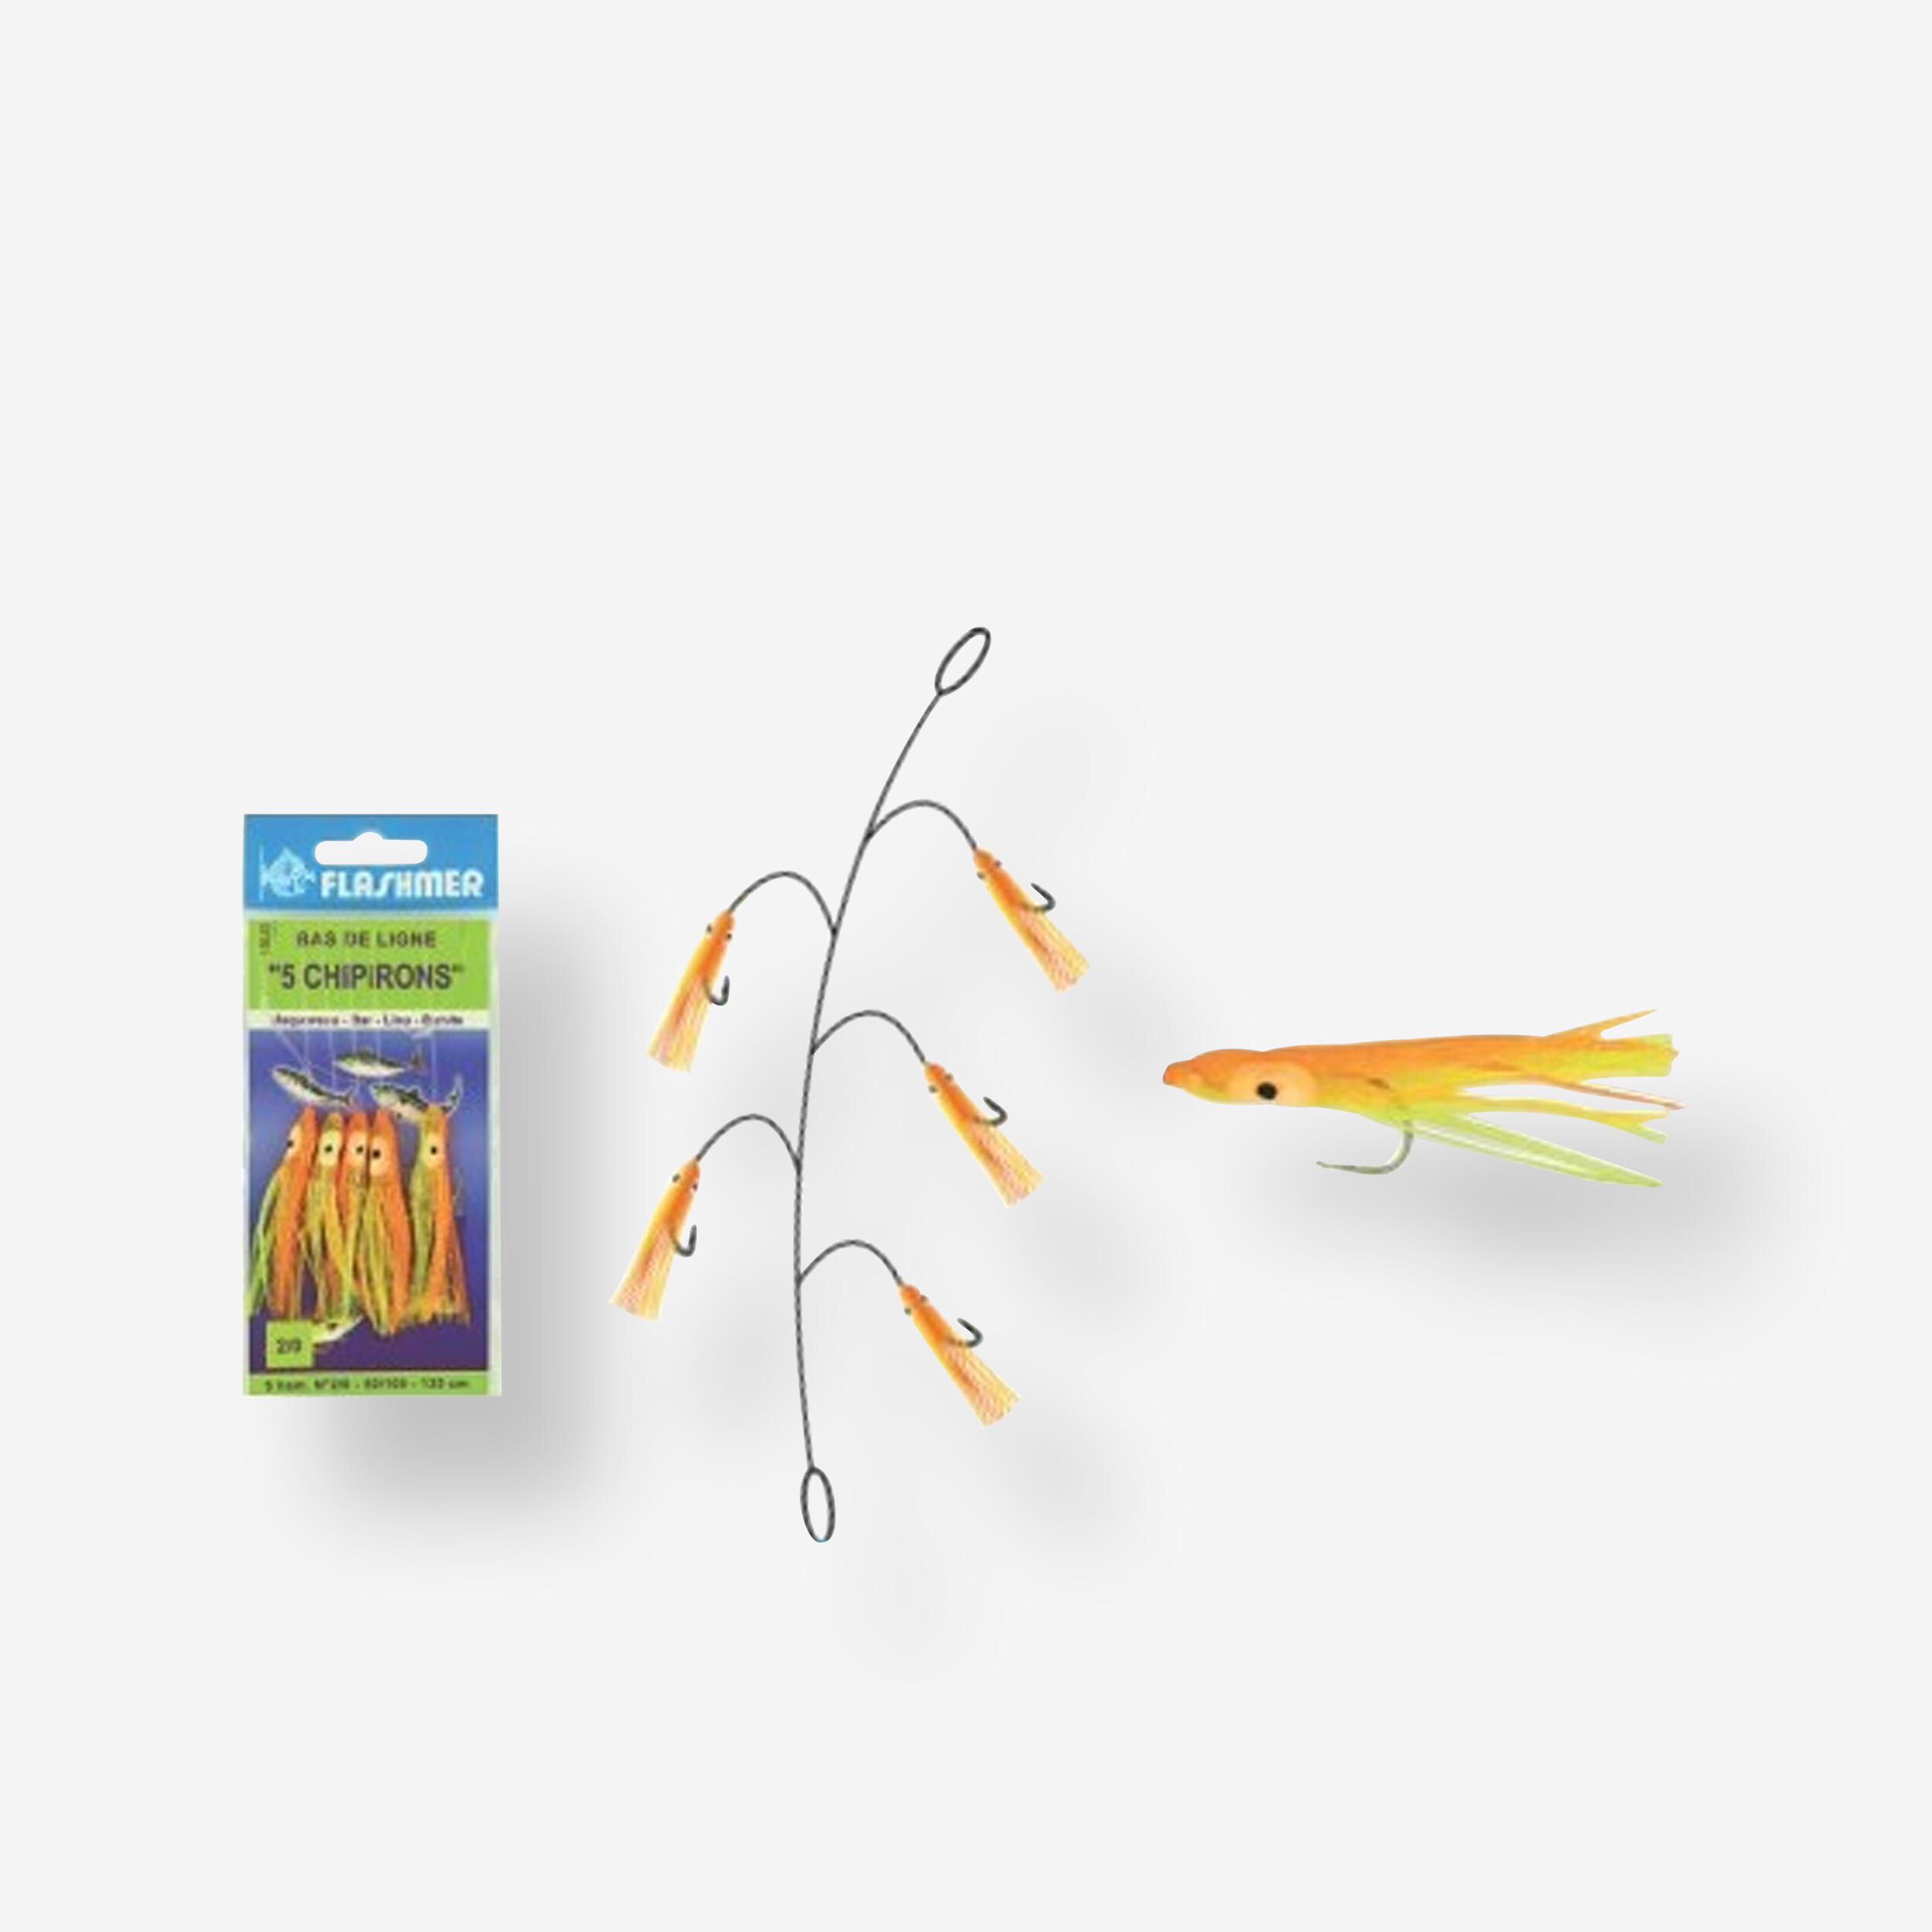 Lure fishing rigged line 5 CHIPIRONS with five hooks No. 2/0 1/1